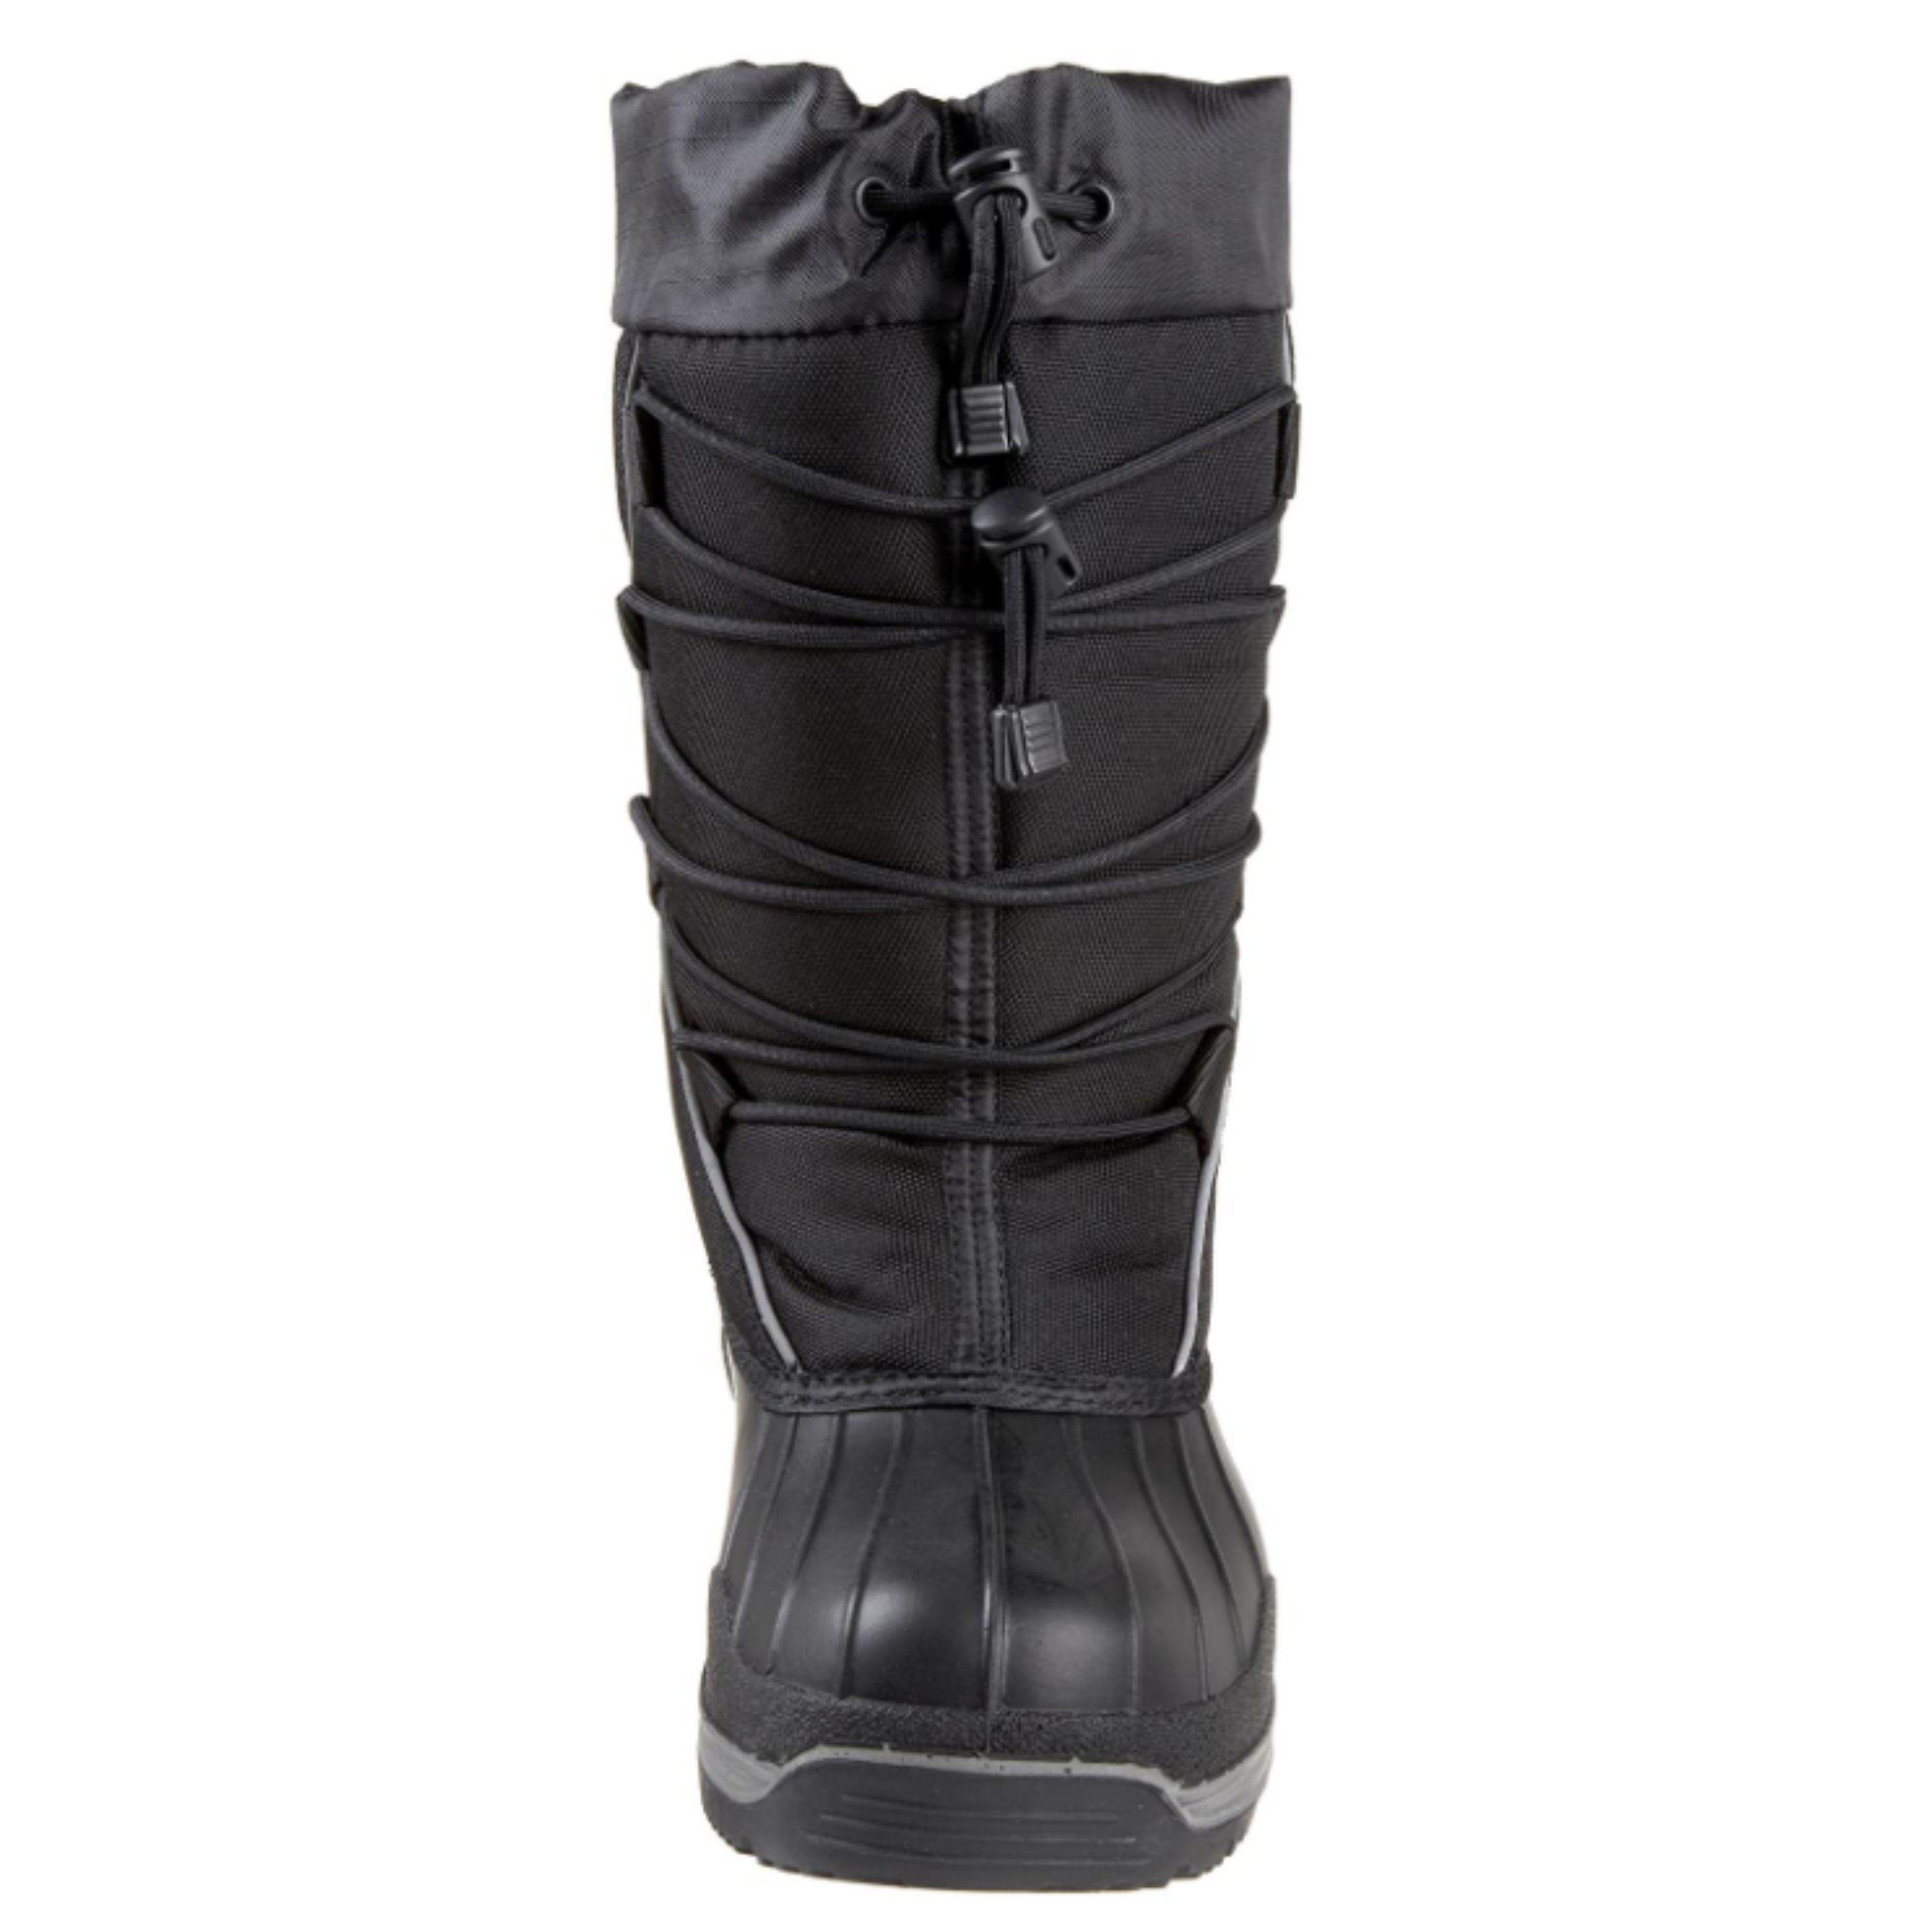 "Icefield" Winter boots - Women's